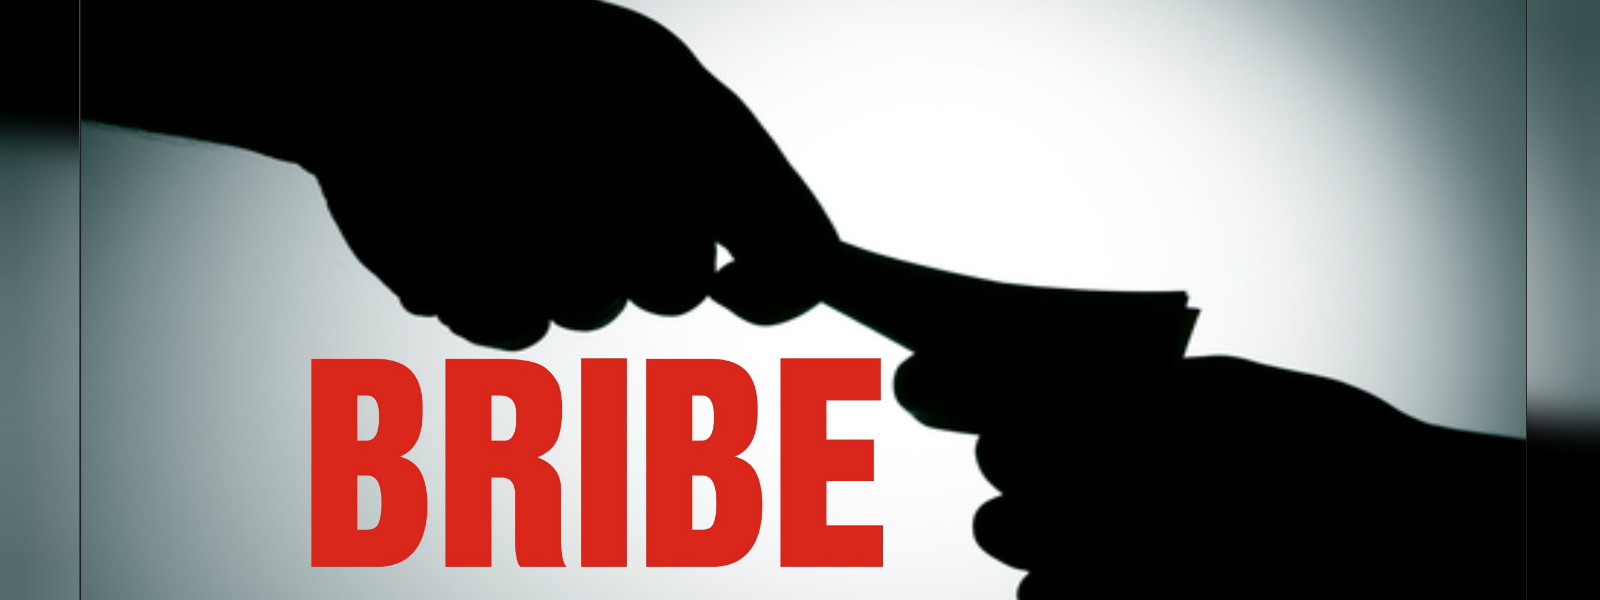 Officer arrested for soliciting a bribe